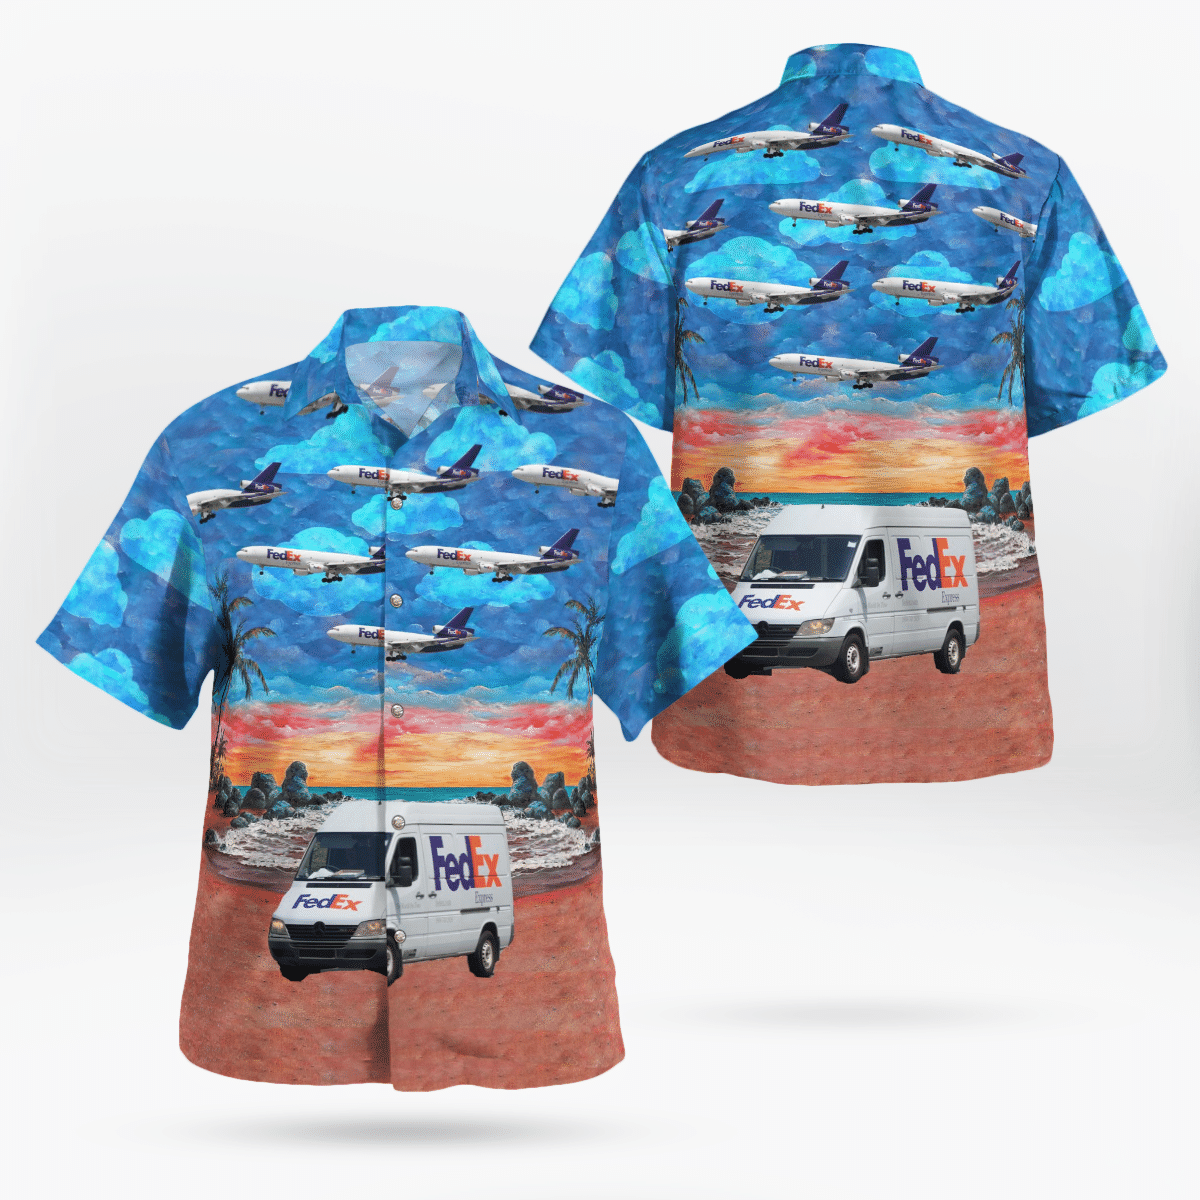 Consider getting these Hawaiian Shirt for your friends 89